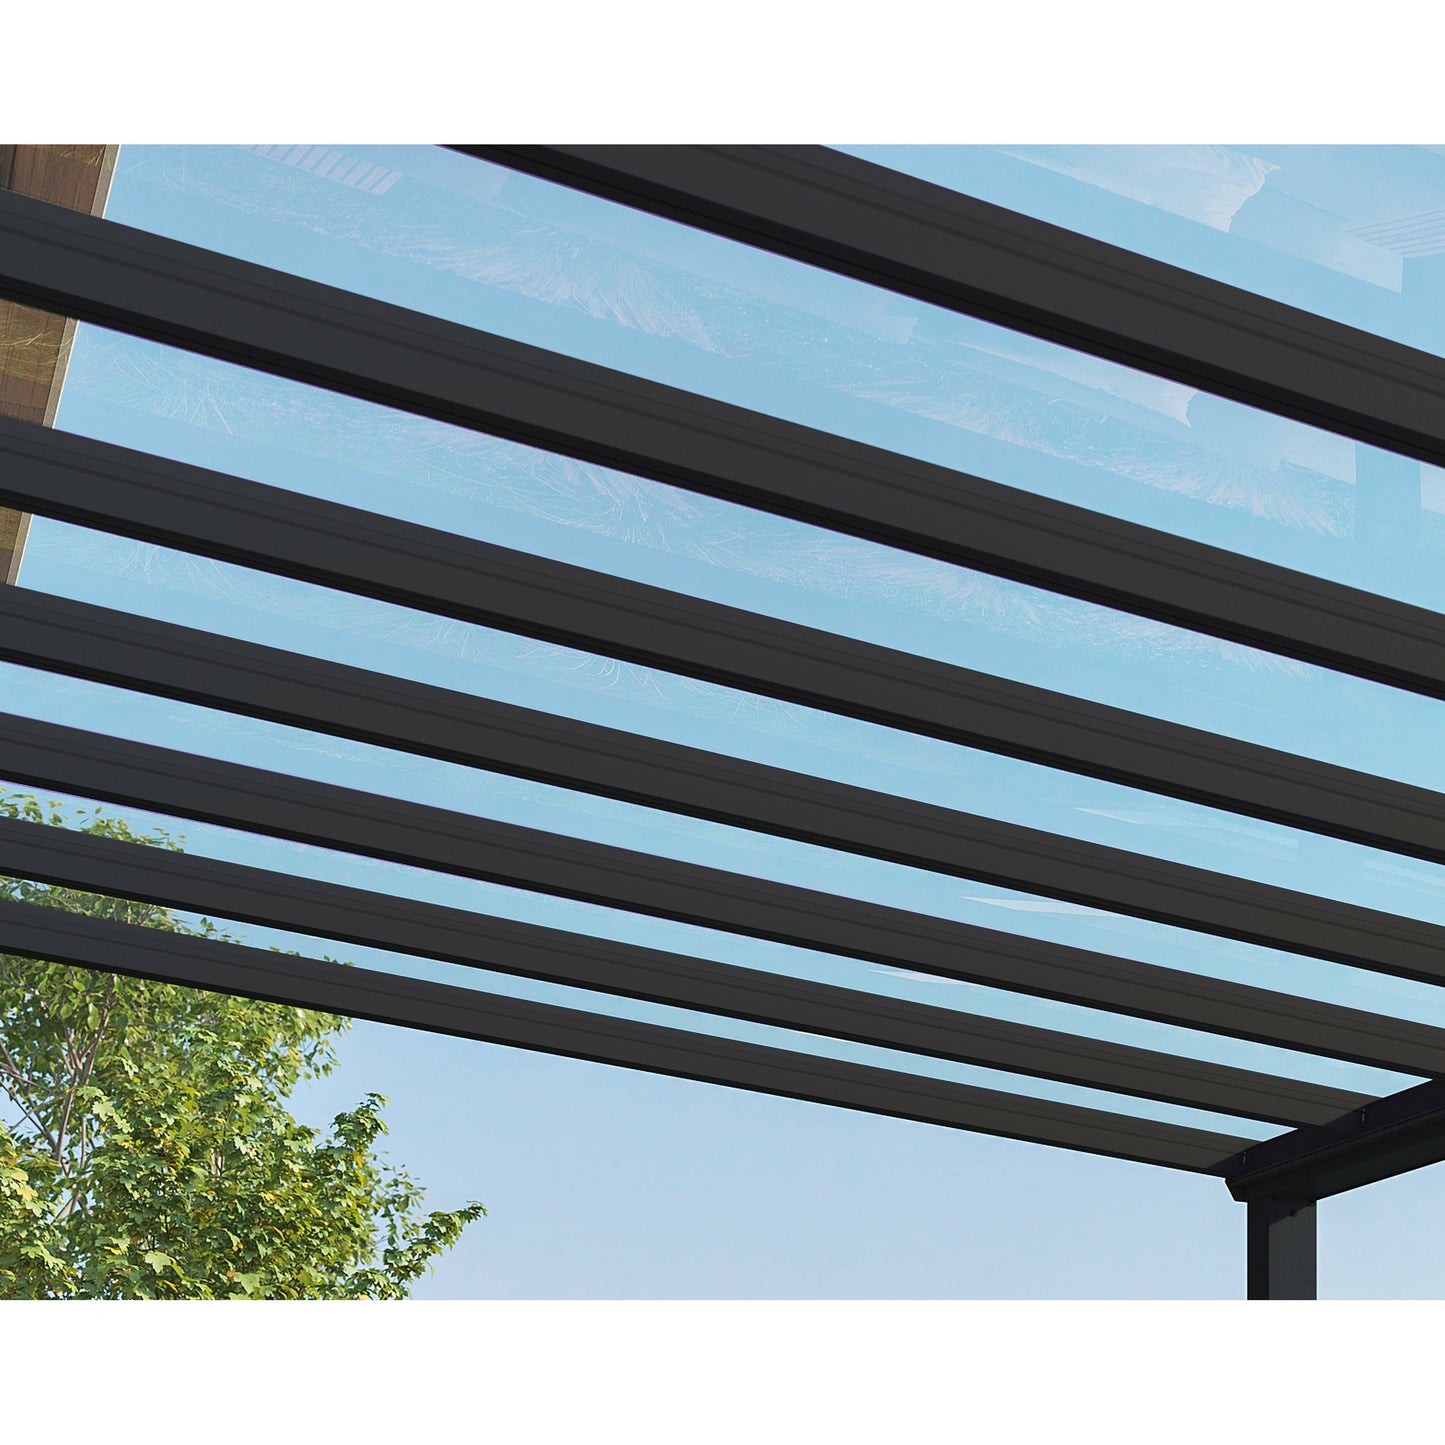 PALRAM STOCKHOLM PATIO COVER GRAY CLEAR 11x31